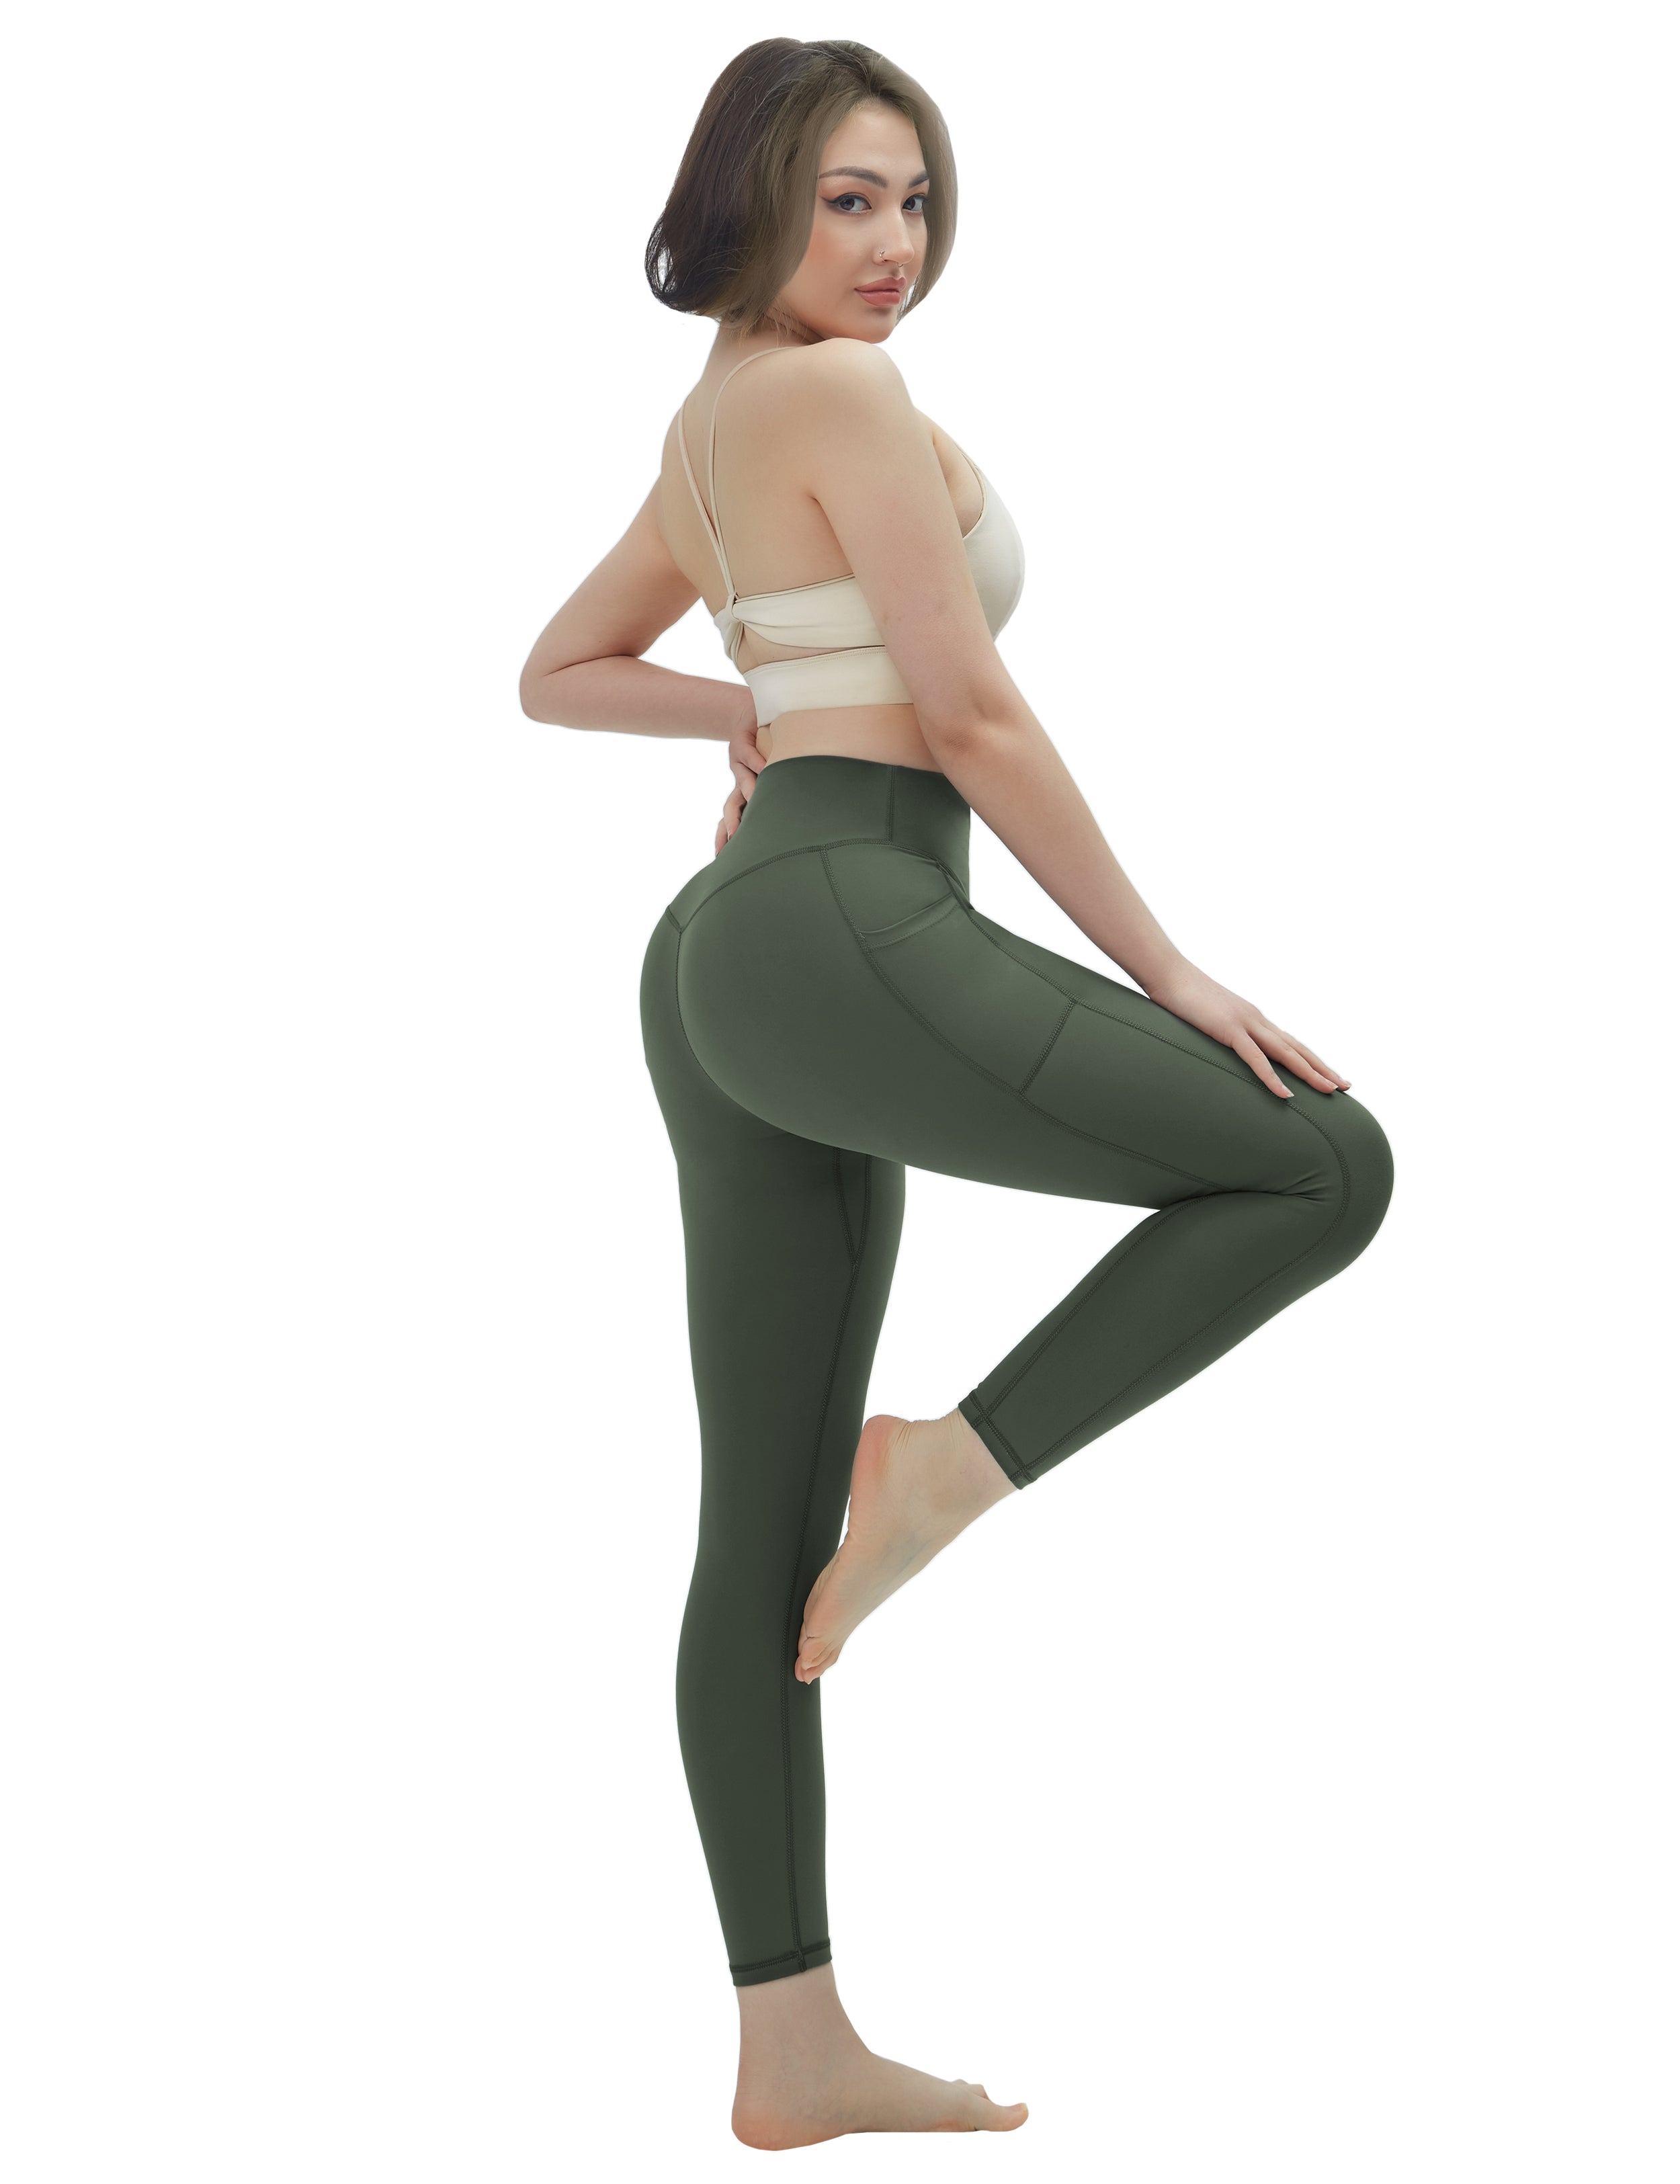 High Waisted Plus Size Pants 7/8 Length Leggings with Pockets olivegreen_Plus Size